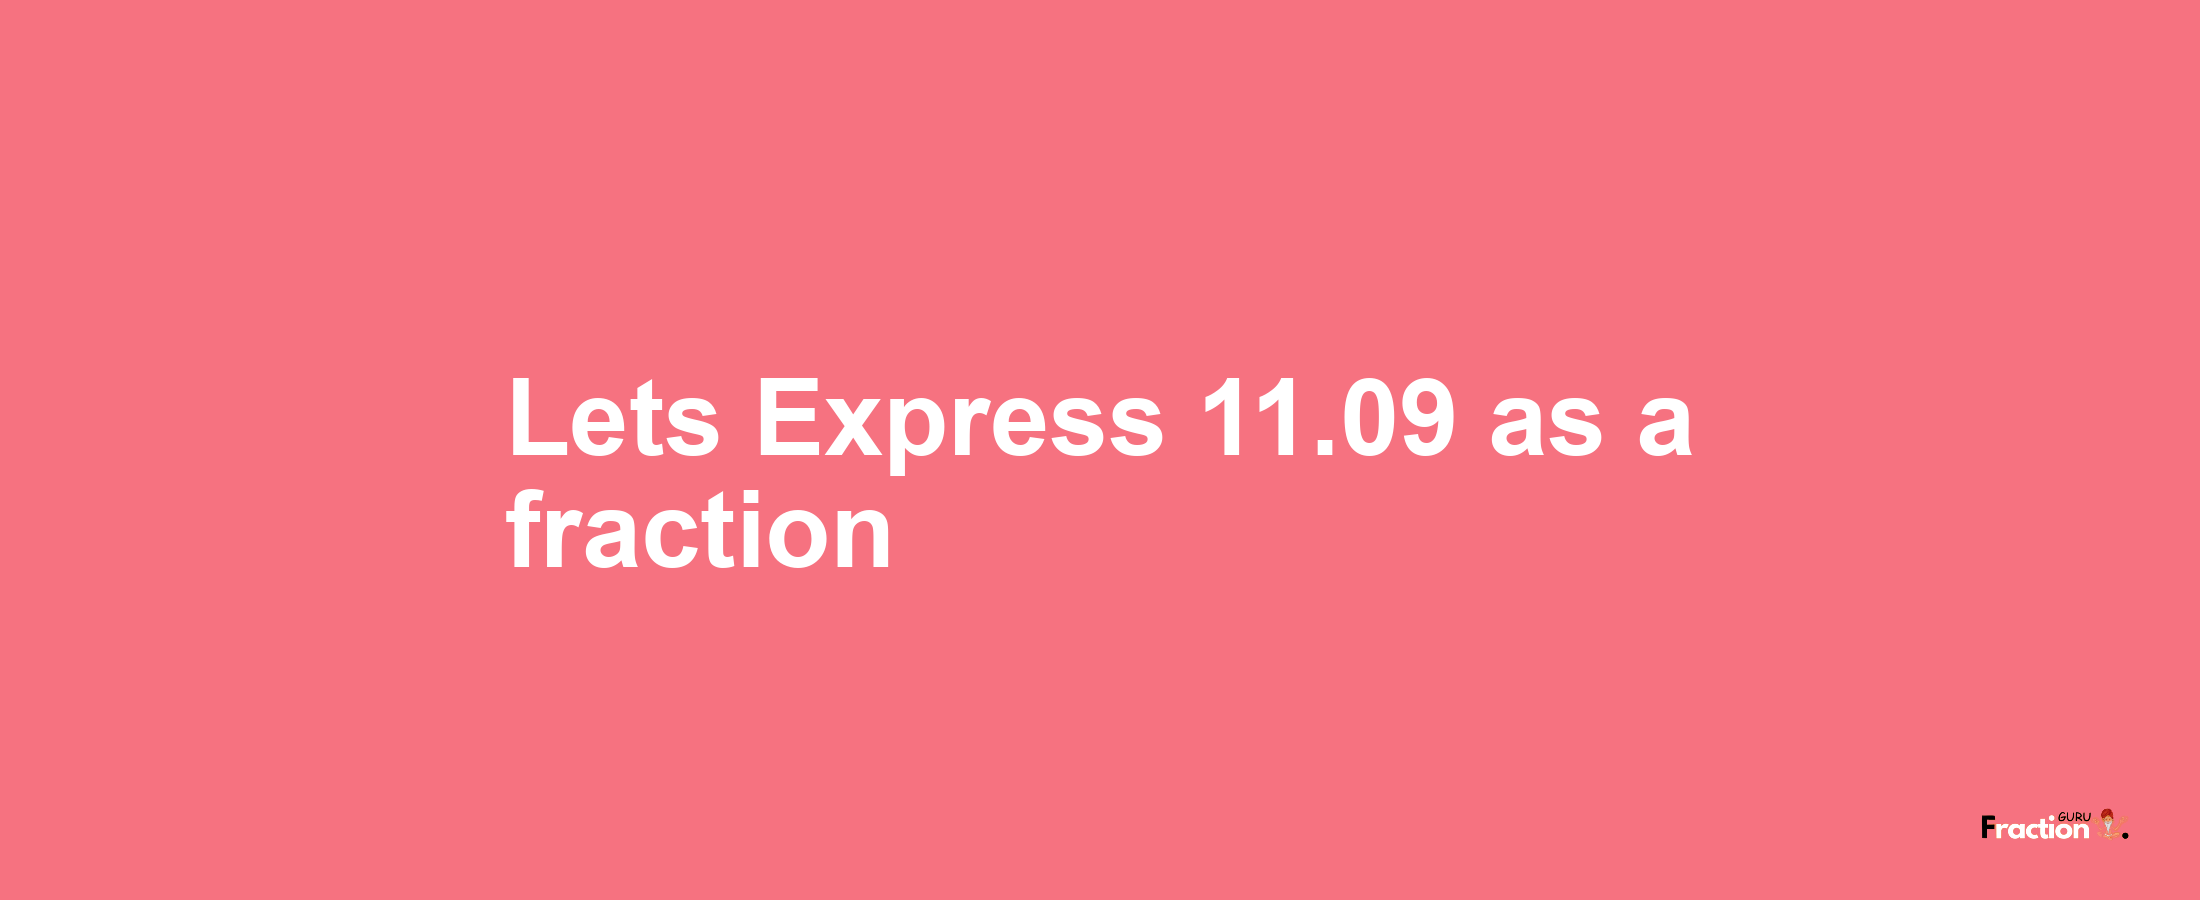 Lets Express 11.09 as afraction